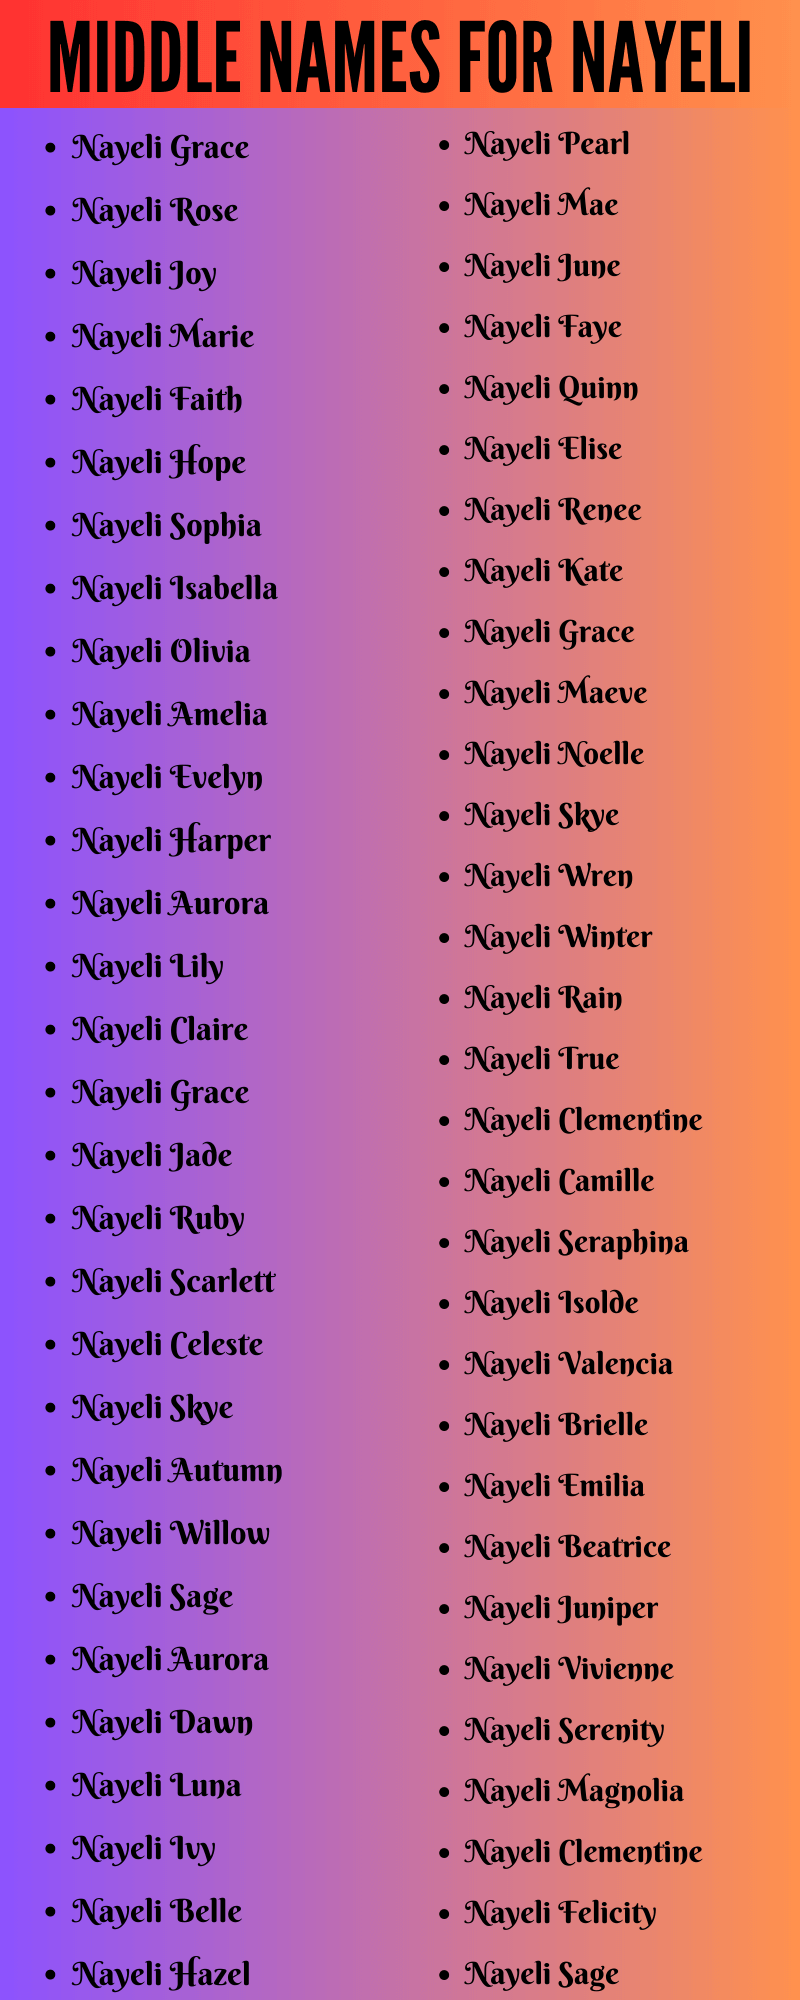 400 Best Middle Names For Nayeli